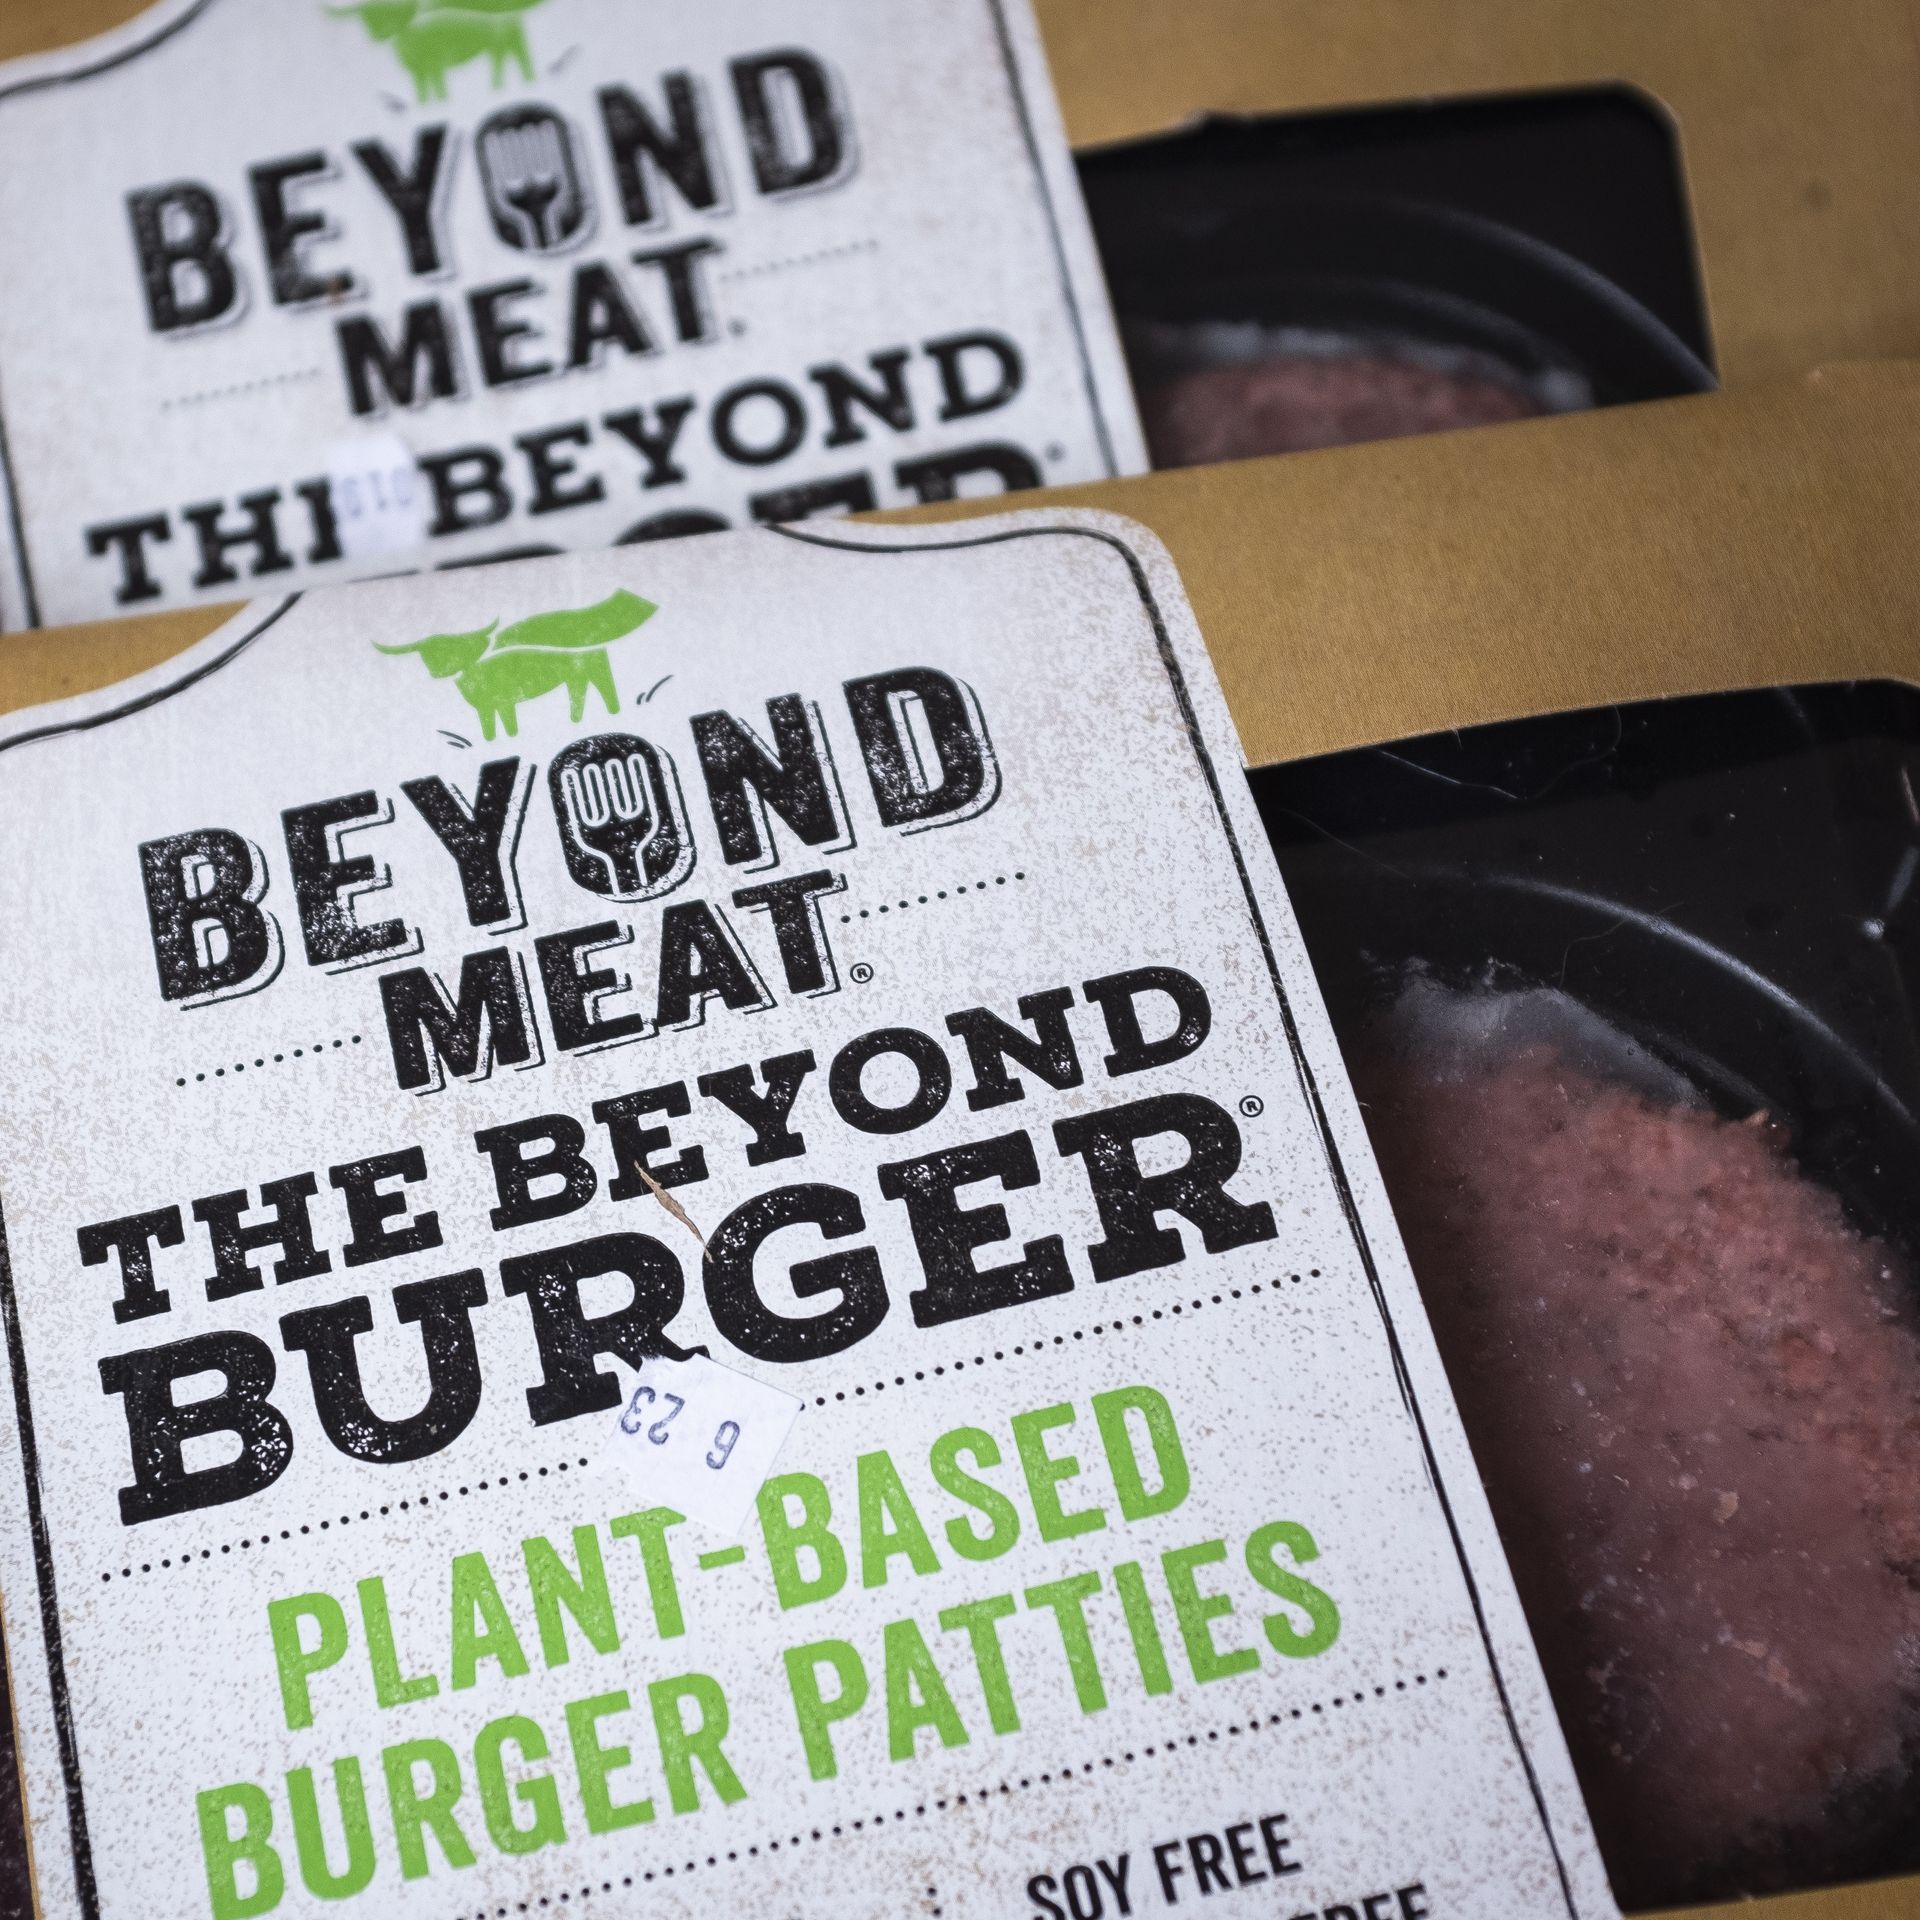 Tim Hortons dropping Beyond Meat products from menus except in